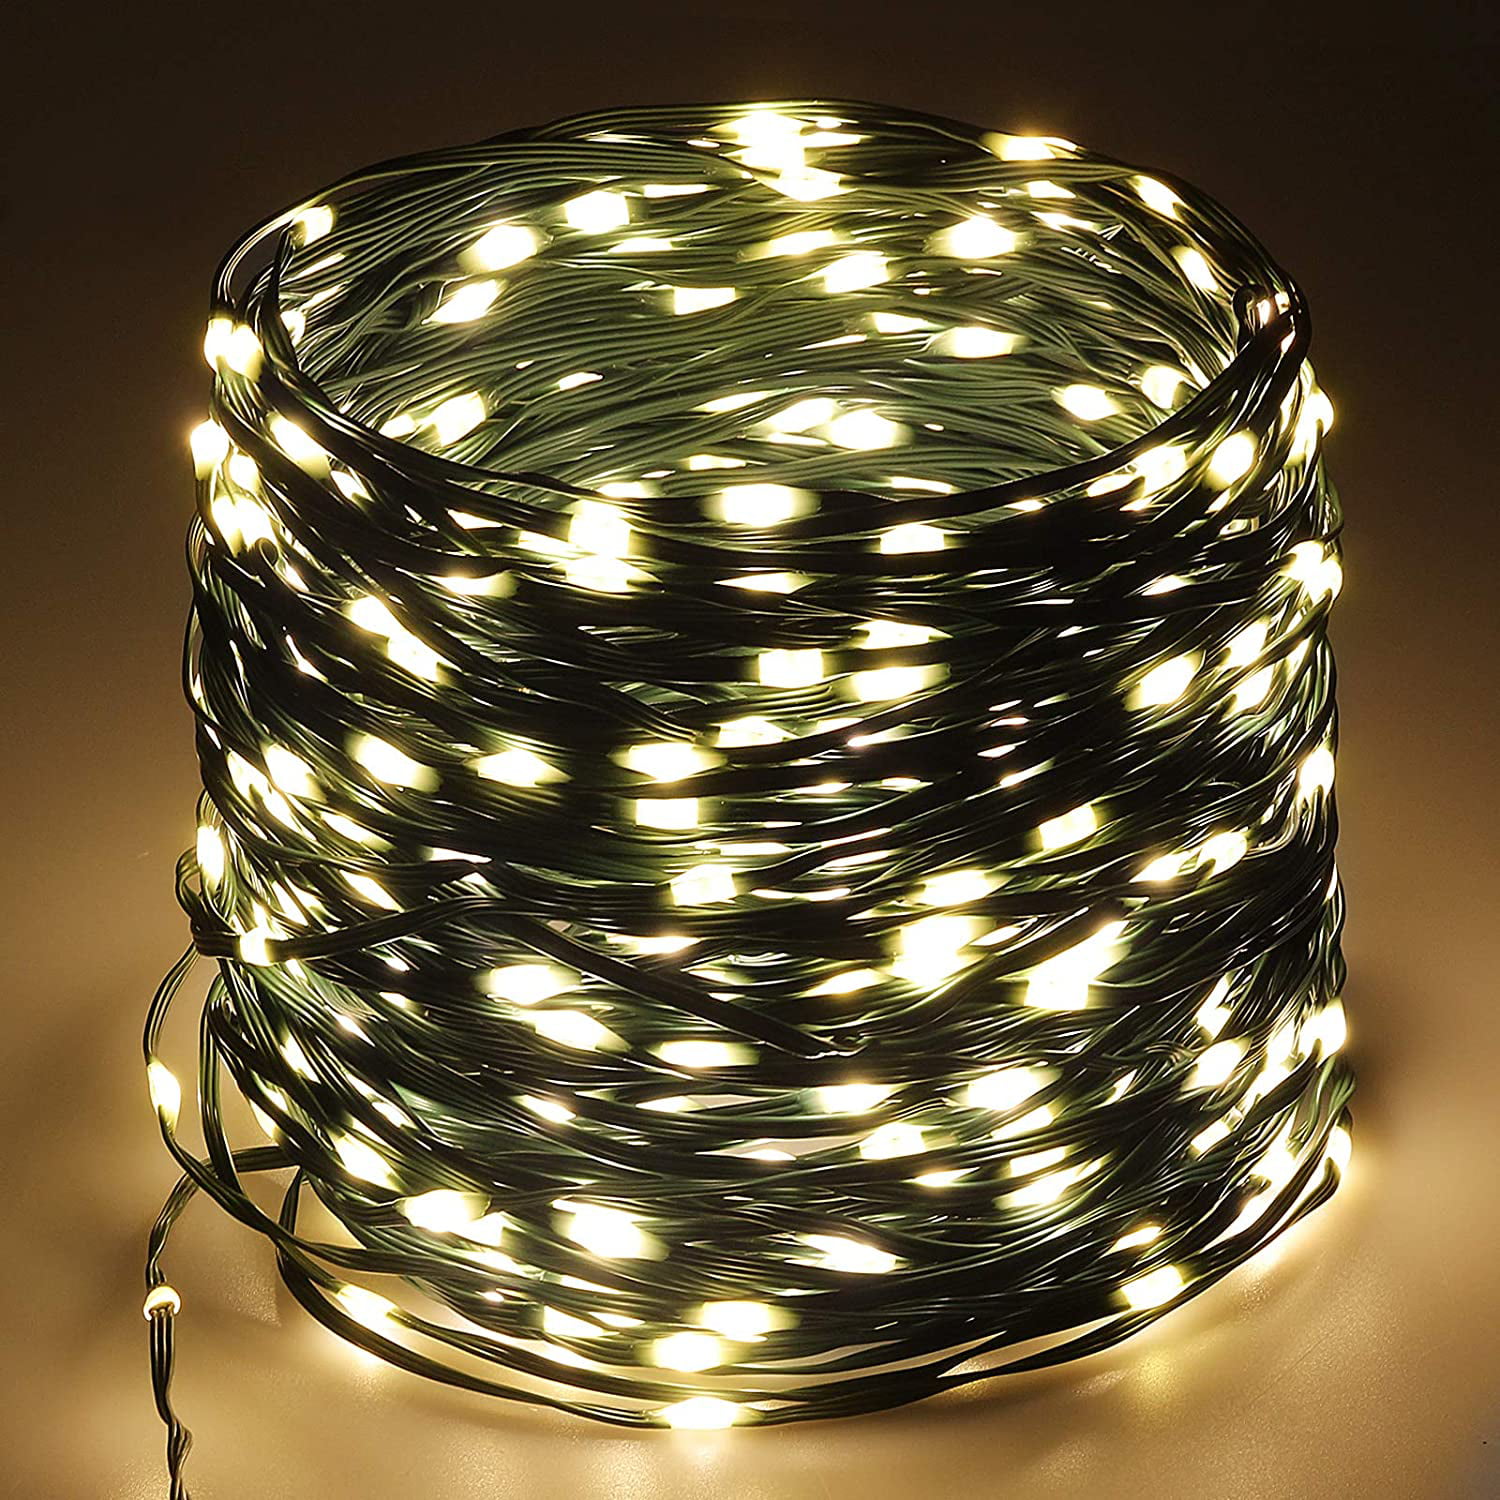 Remote 500LED Fairy String Lights Warm White Christmas Lights 164ft Silver Wire